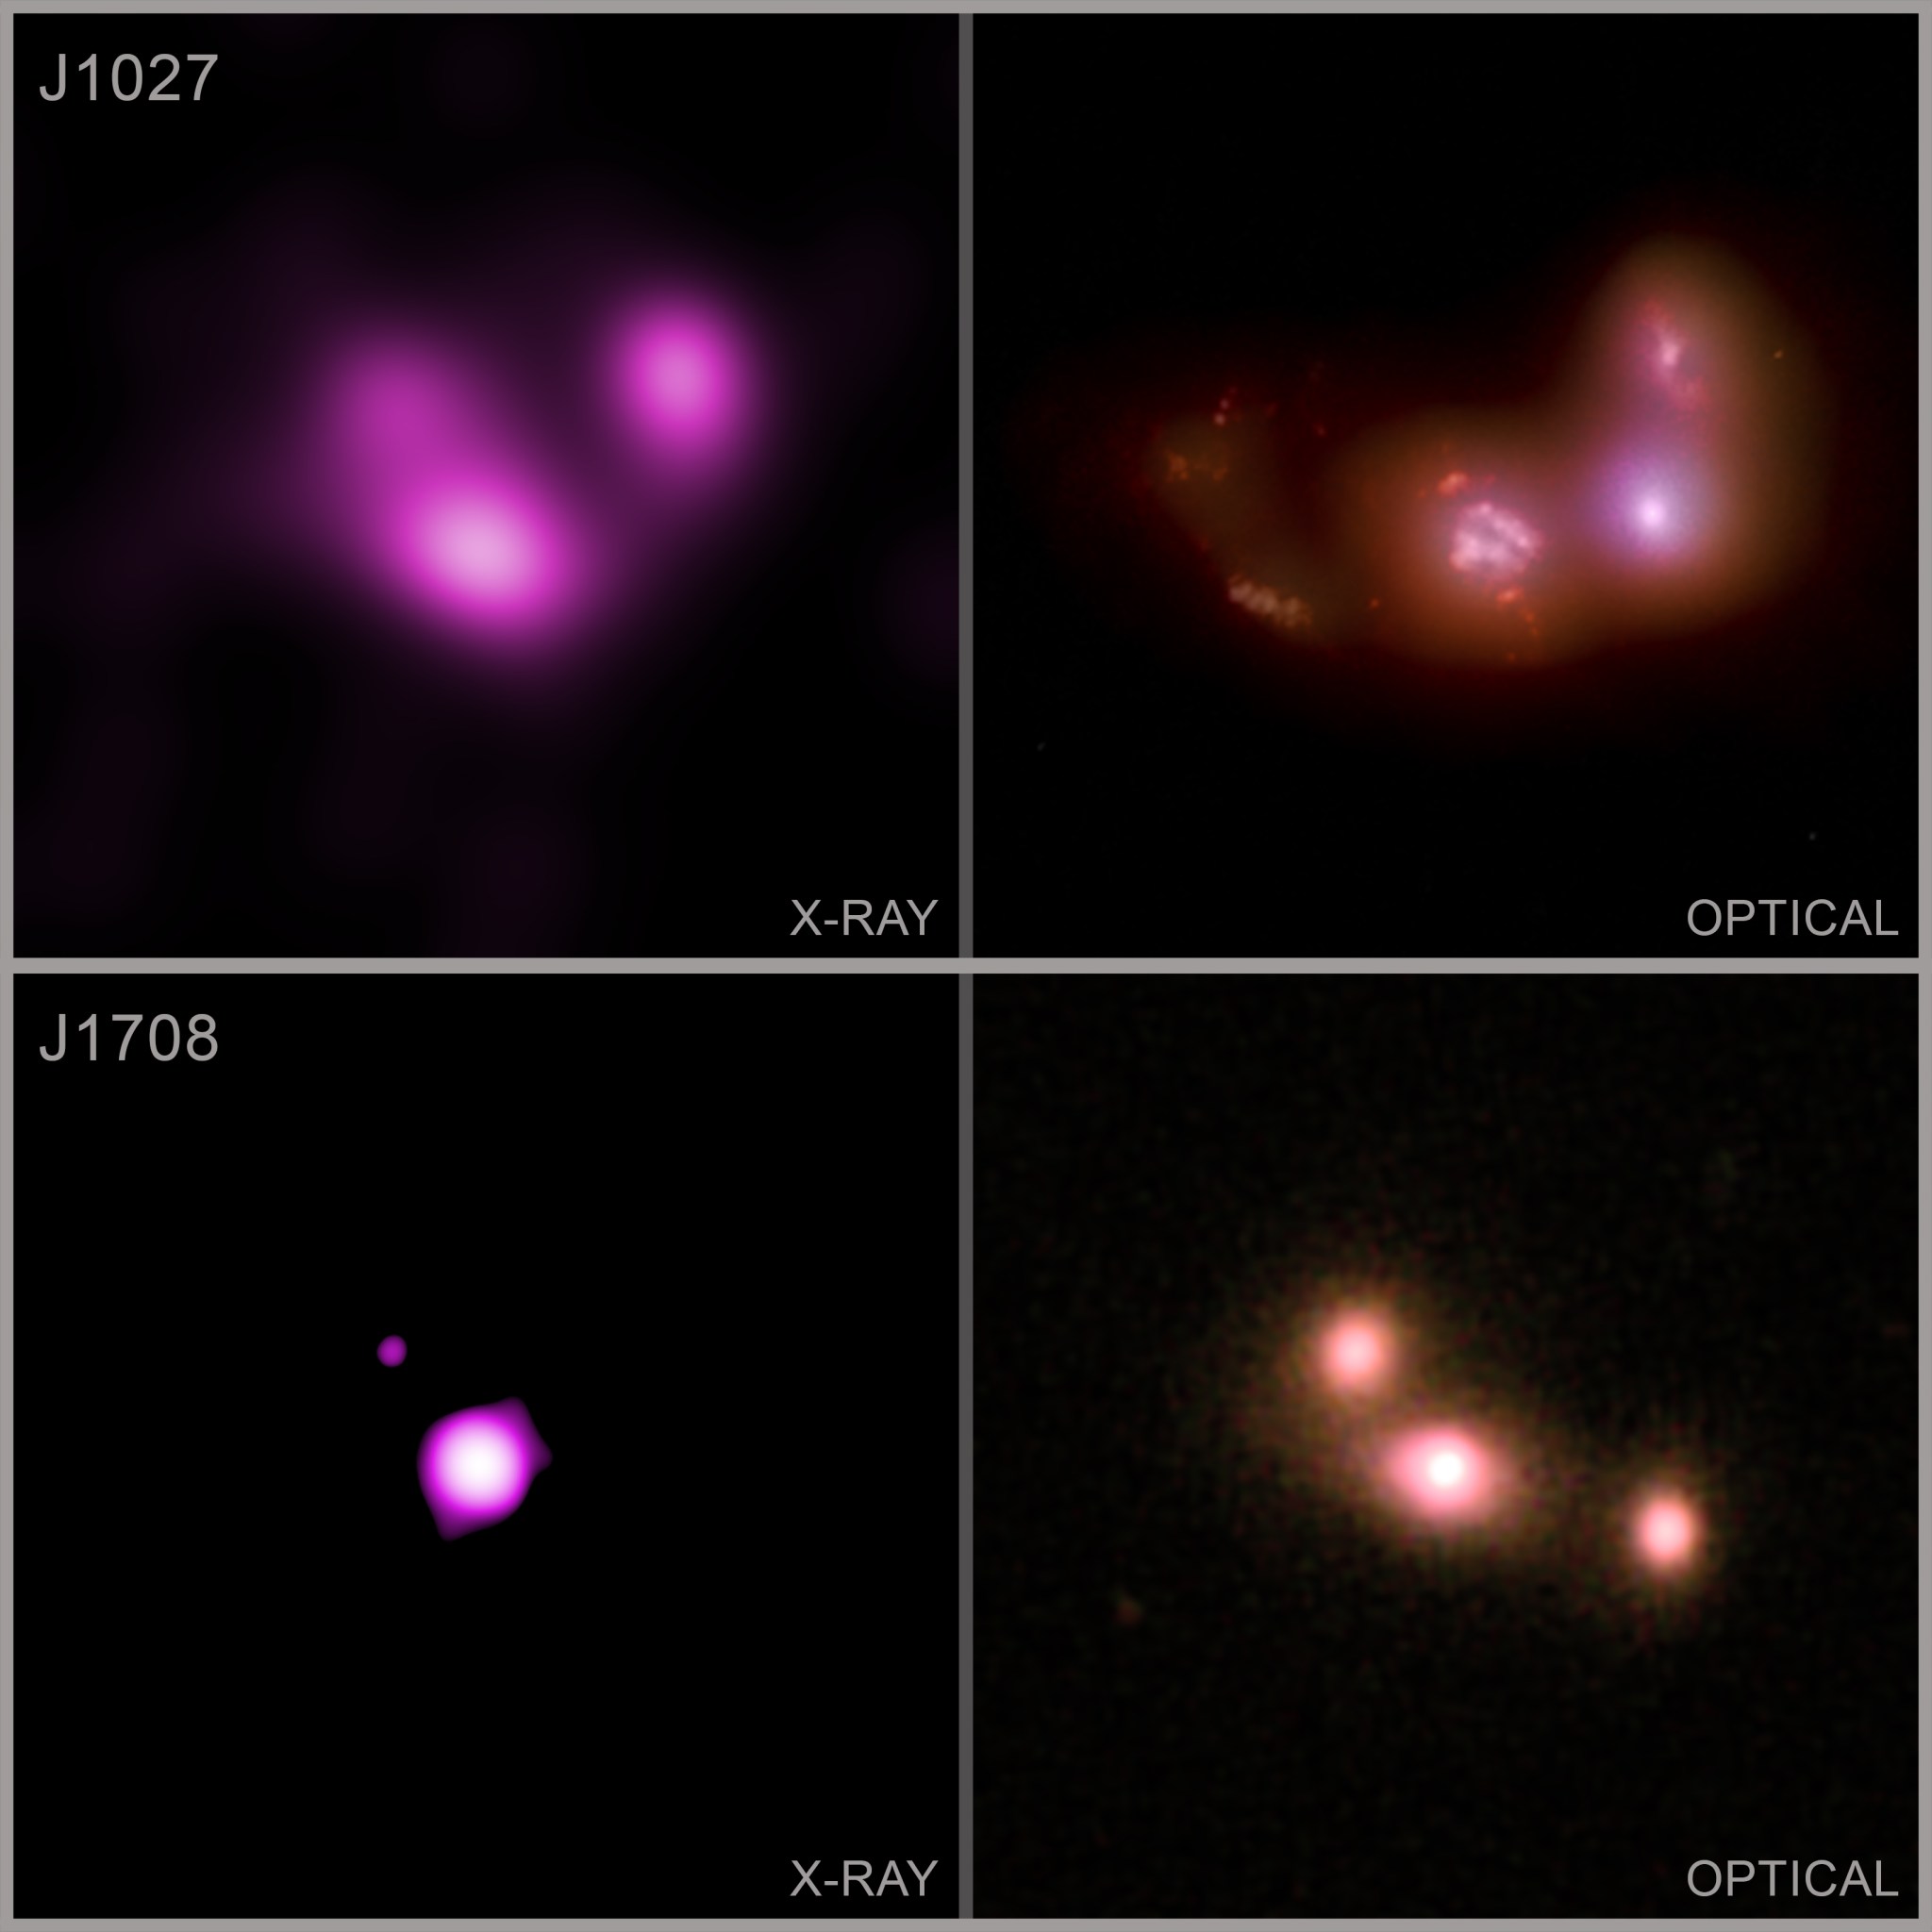 These four objects come from a study of seven triple galaxy mergers.